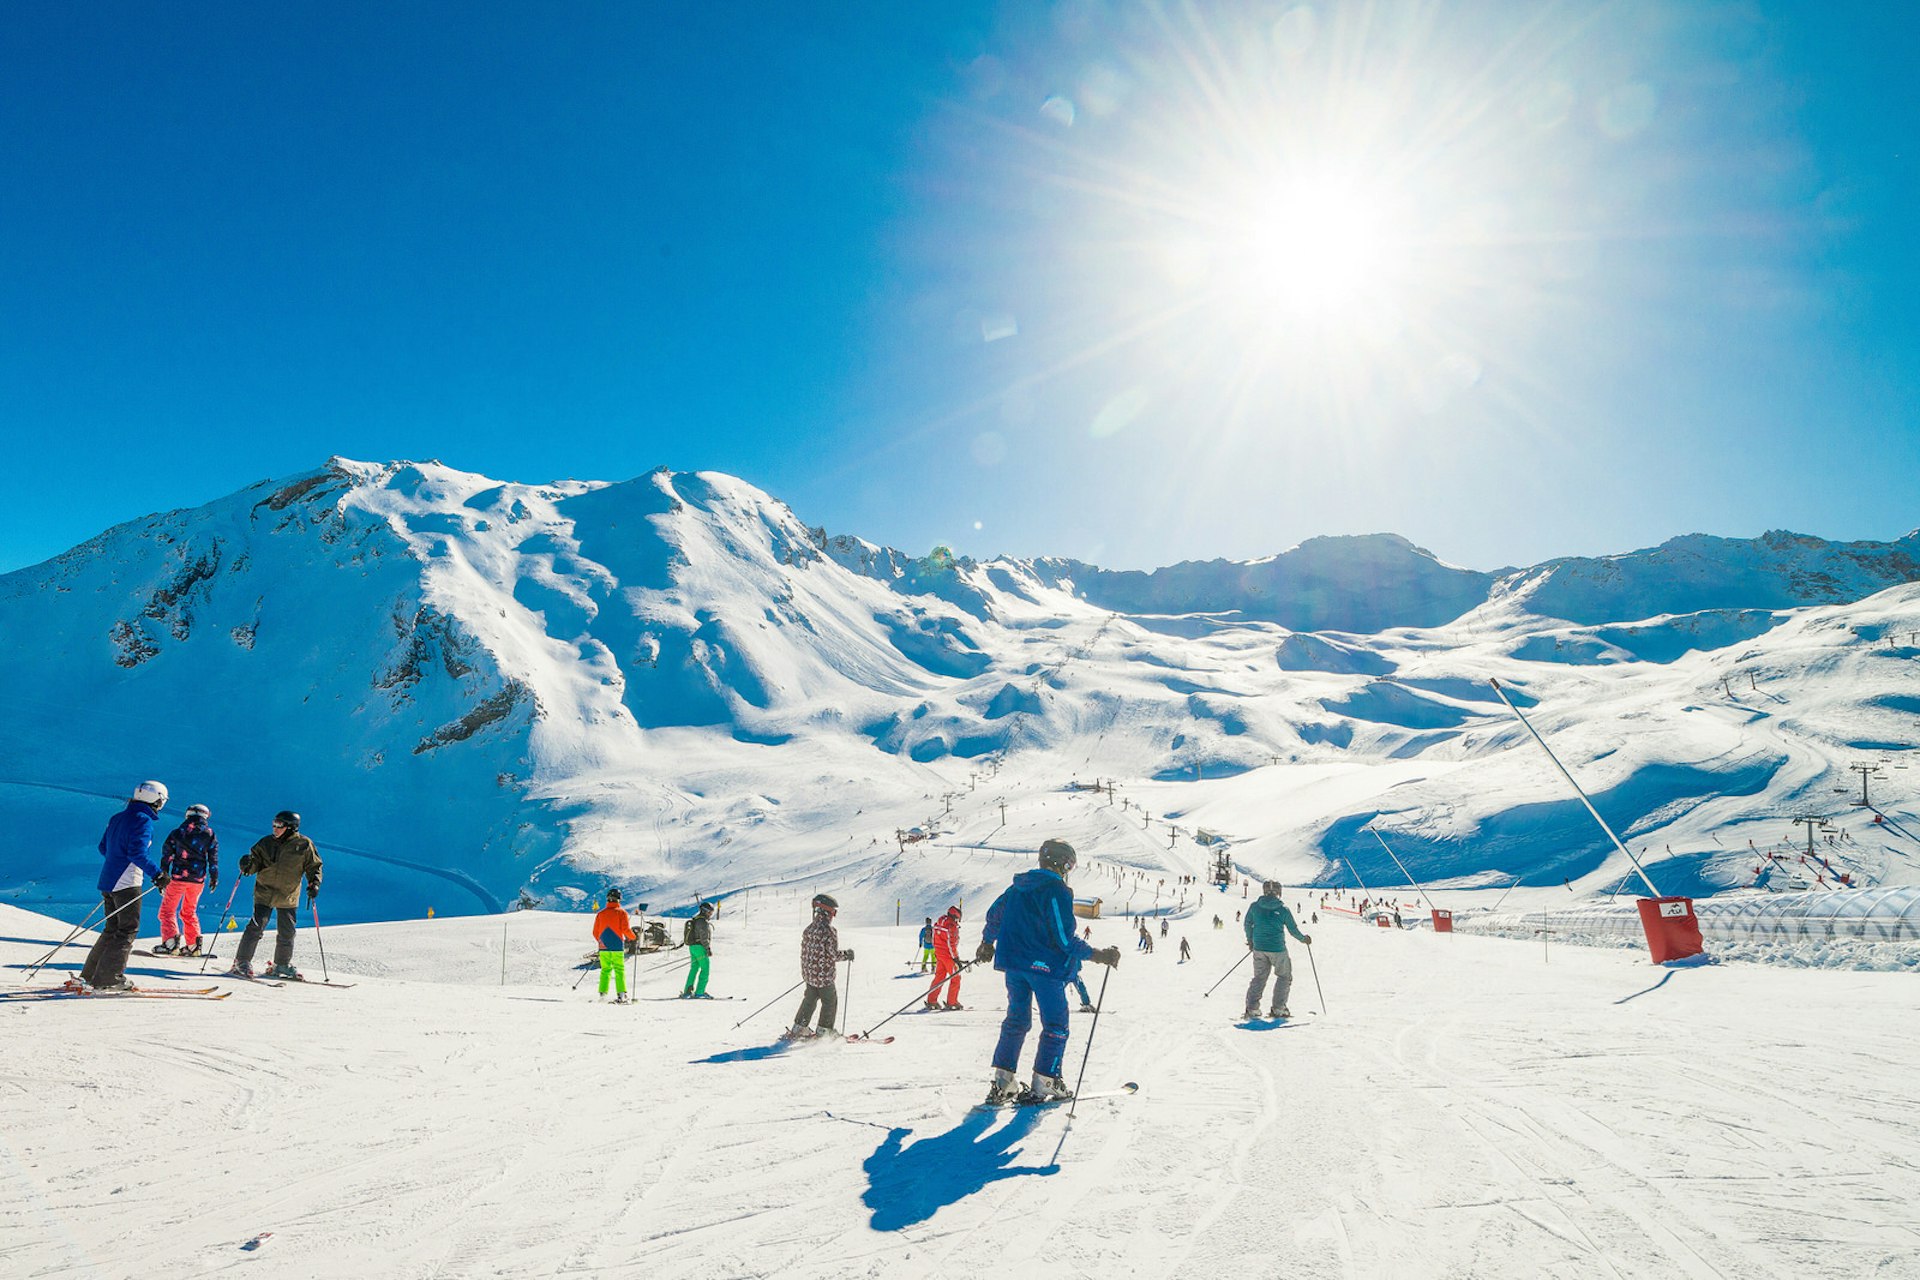 Skiers on a gentle slope surrounded by snowy mountain peaks at Val d'Isère © Val d'Isère